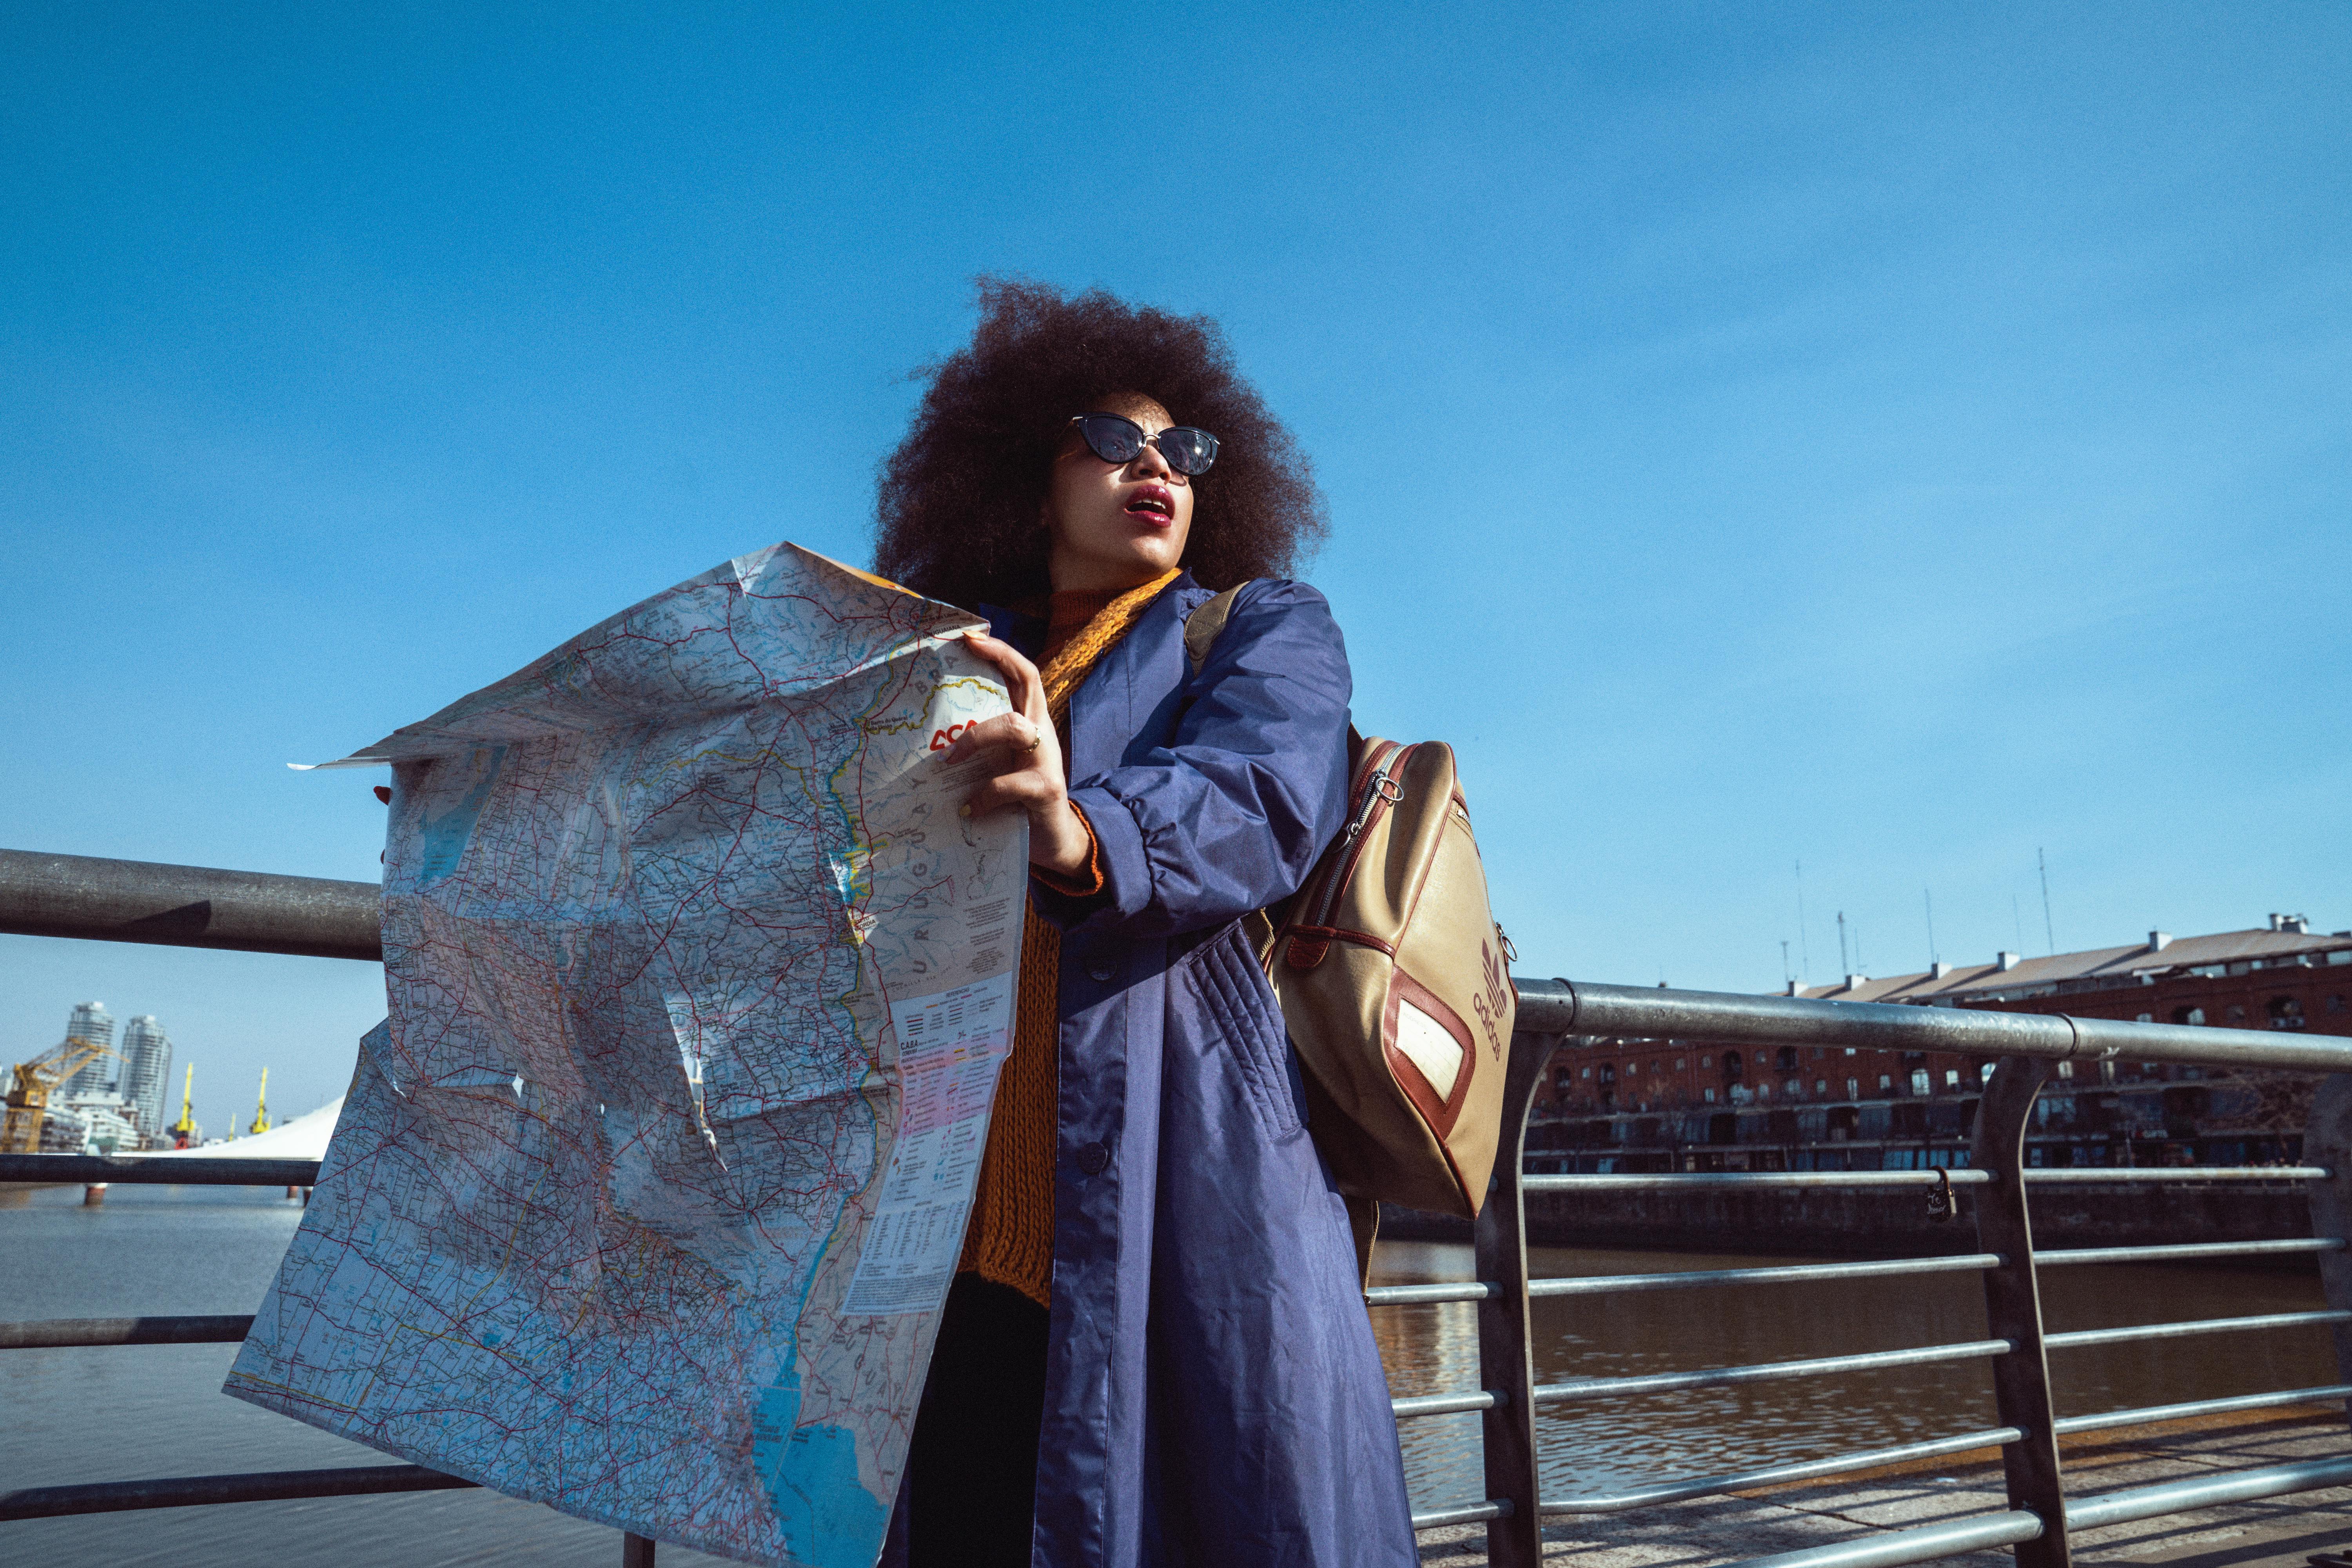 A young black woman looking for directions on a bridge, holding a large paper map.